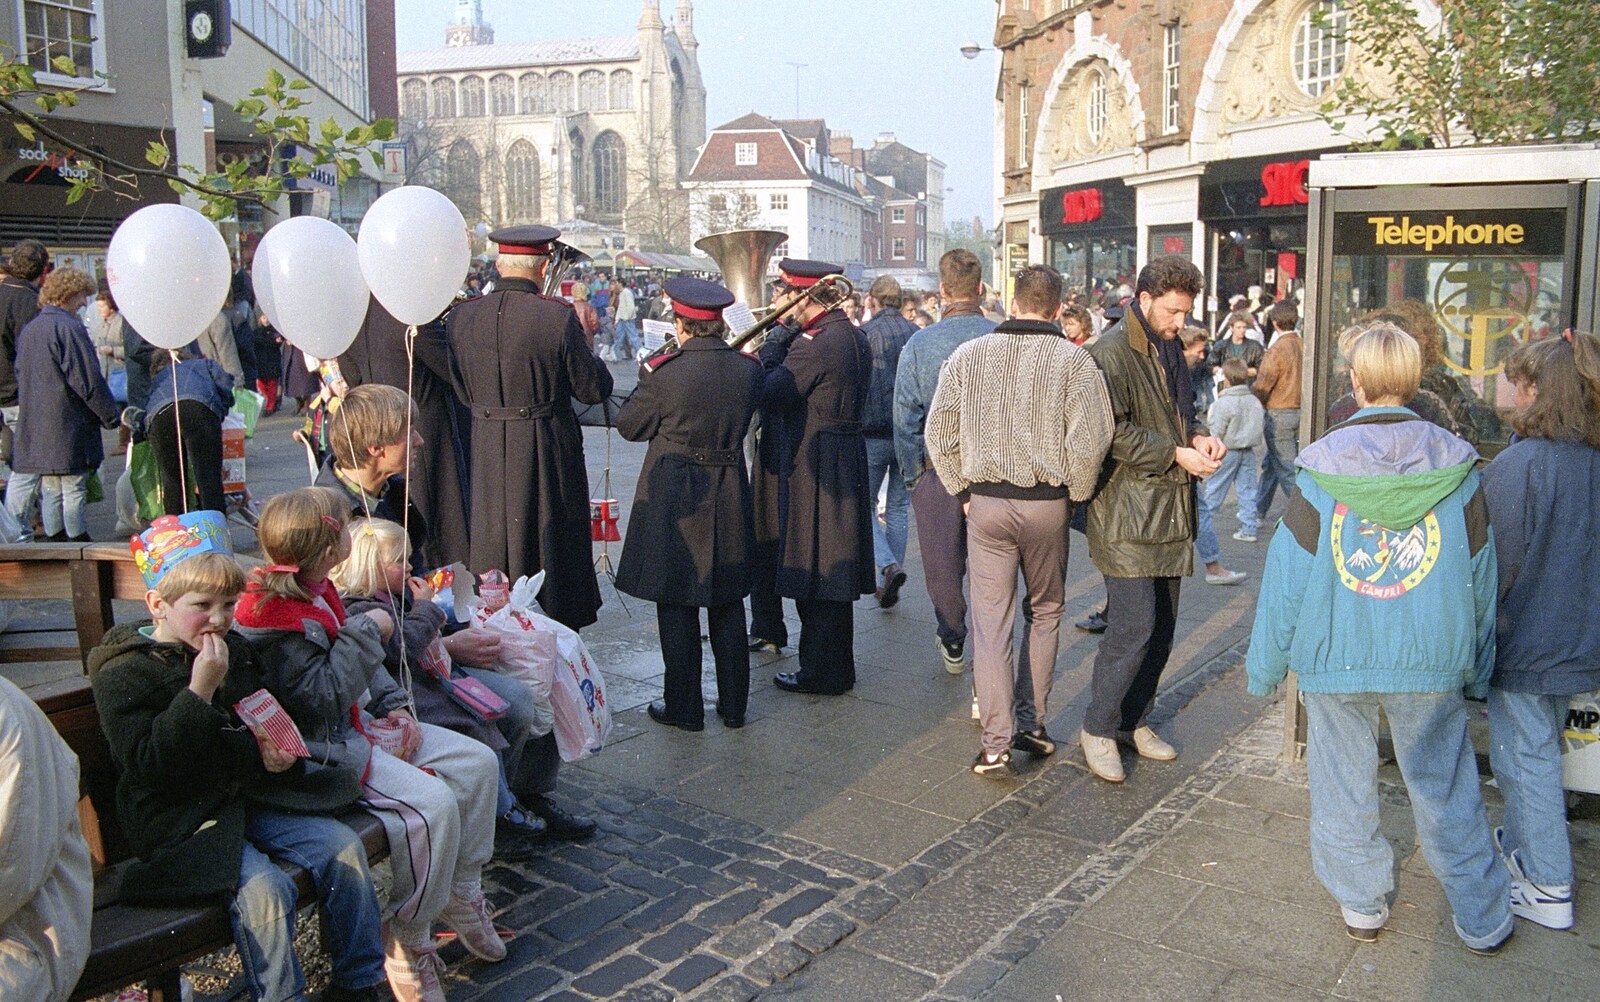 The Salvation Army band on Gentleman's Walk from The Old Man Visits, and a Frosty Stuston, Suffolk - 8th December 1989